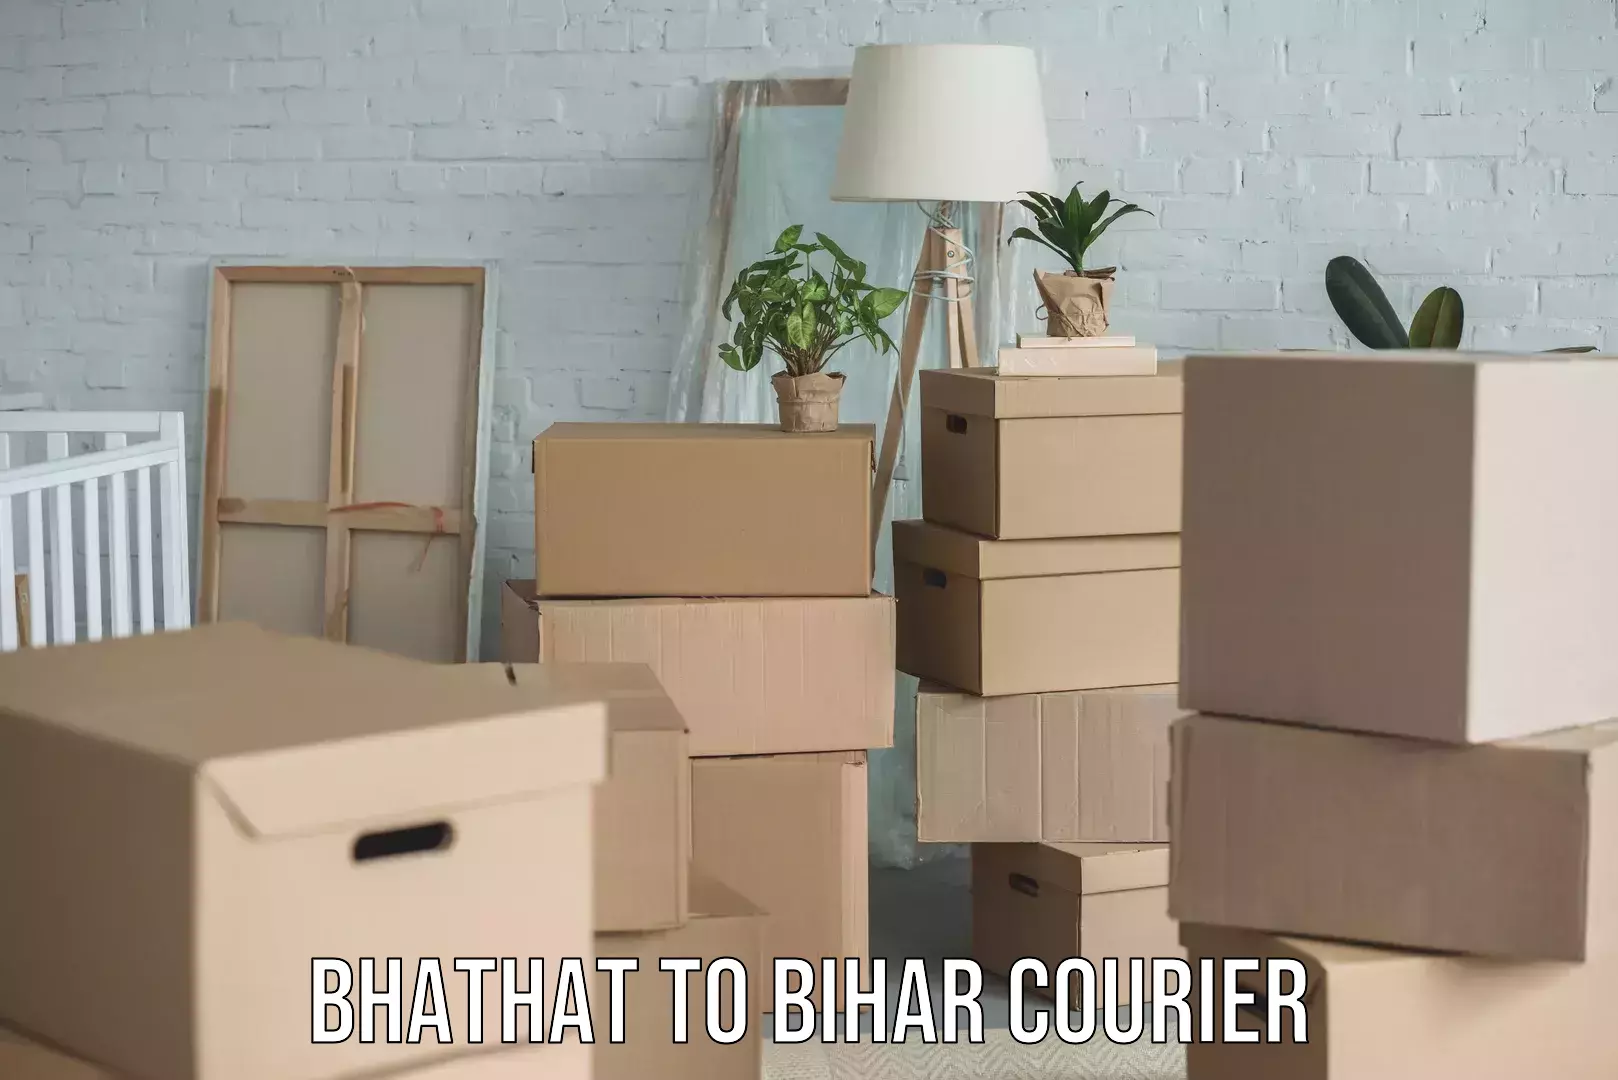 Supply chain delivery Bhathat to Bihar